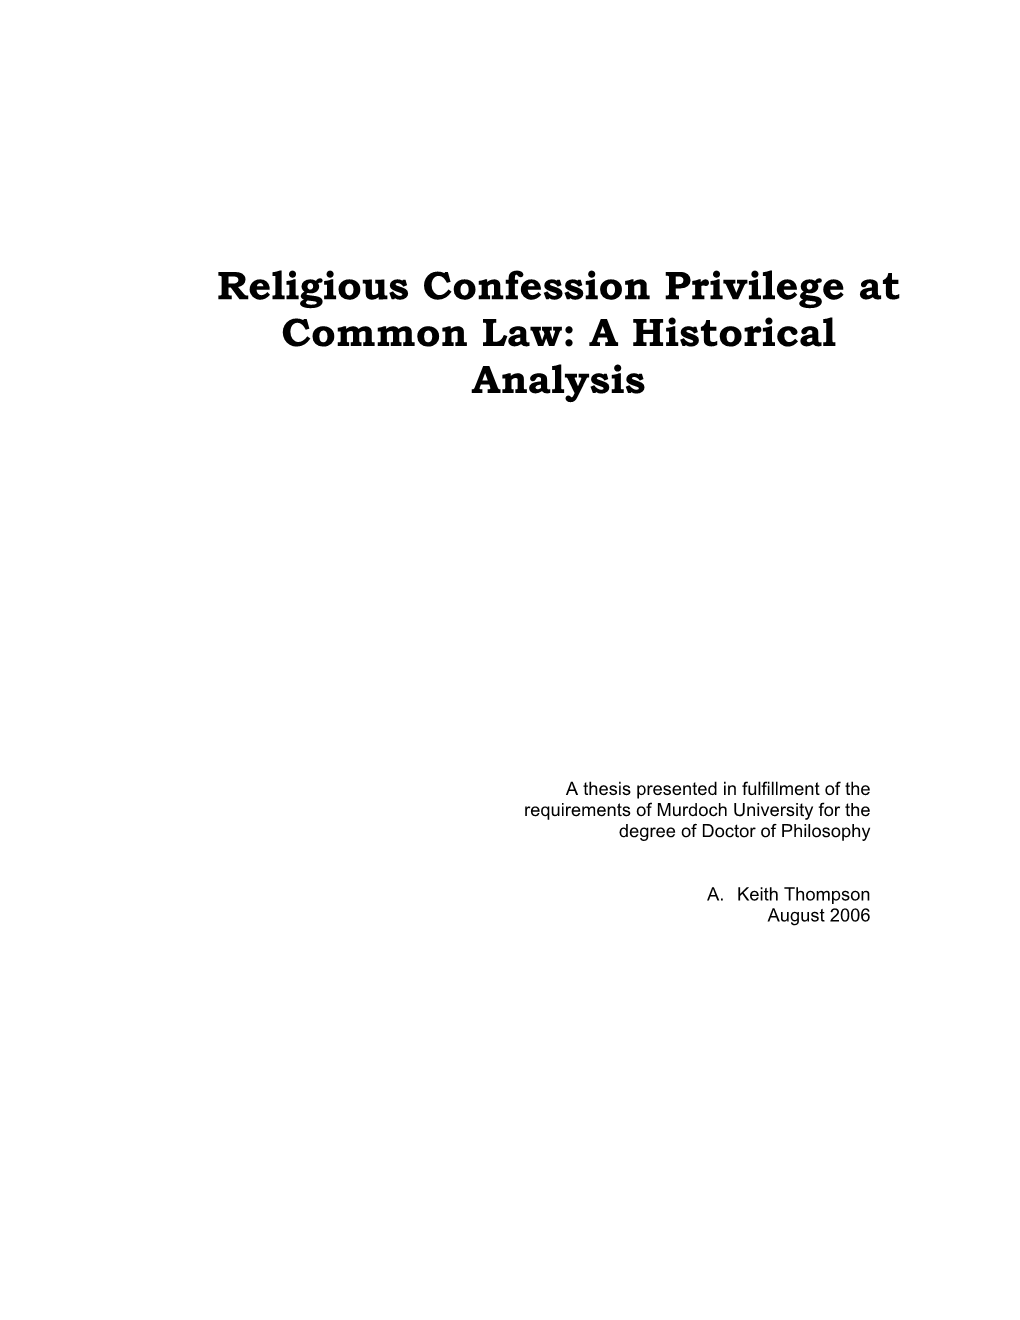 Religious Confession Privilege at Common Law: a Historical Analysis